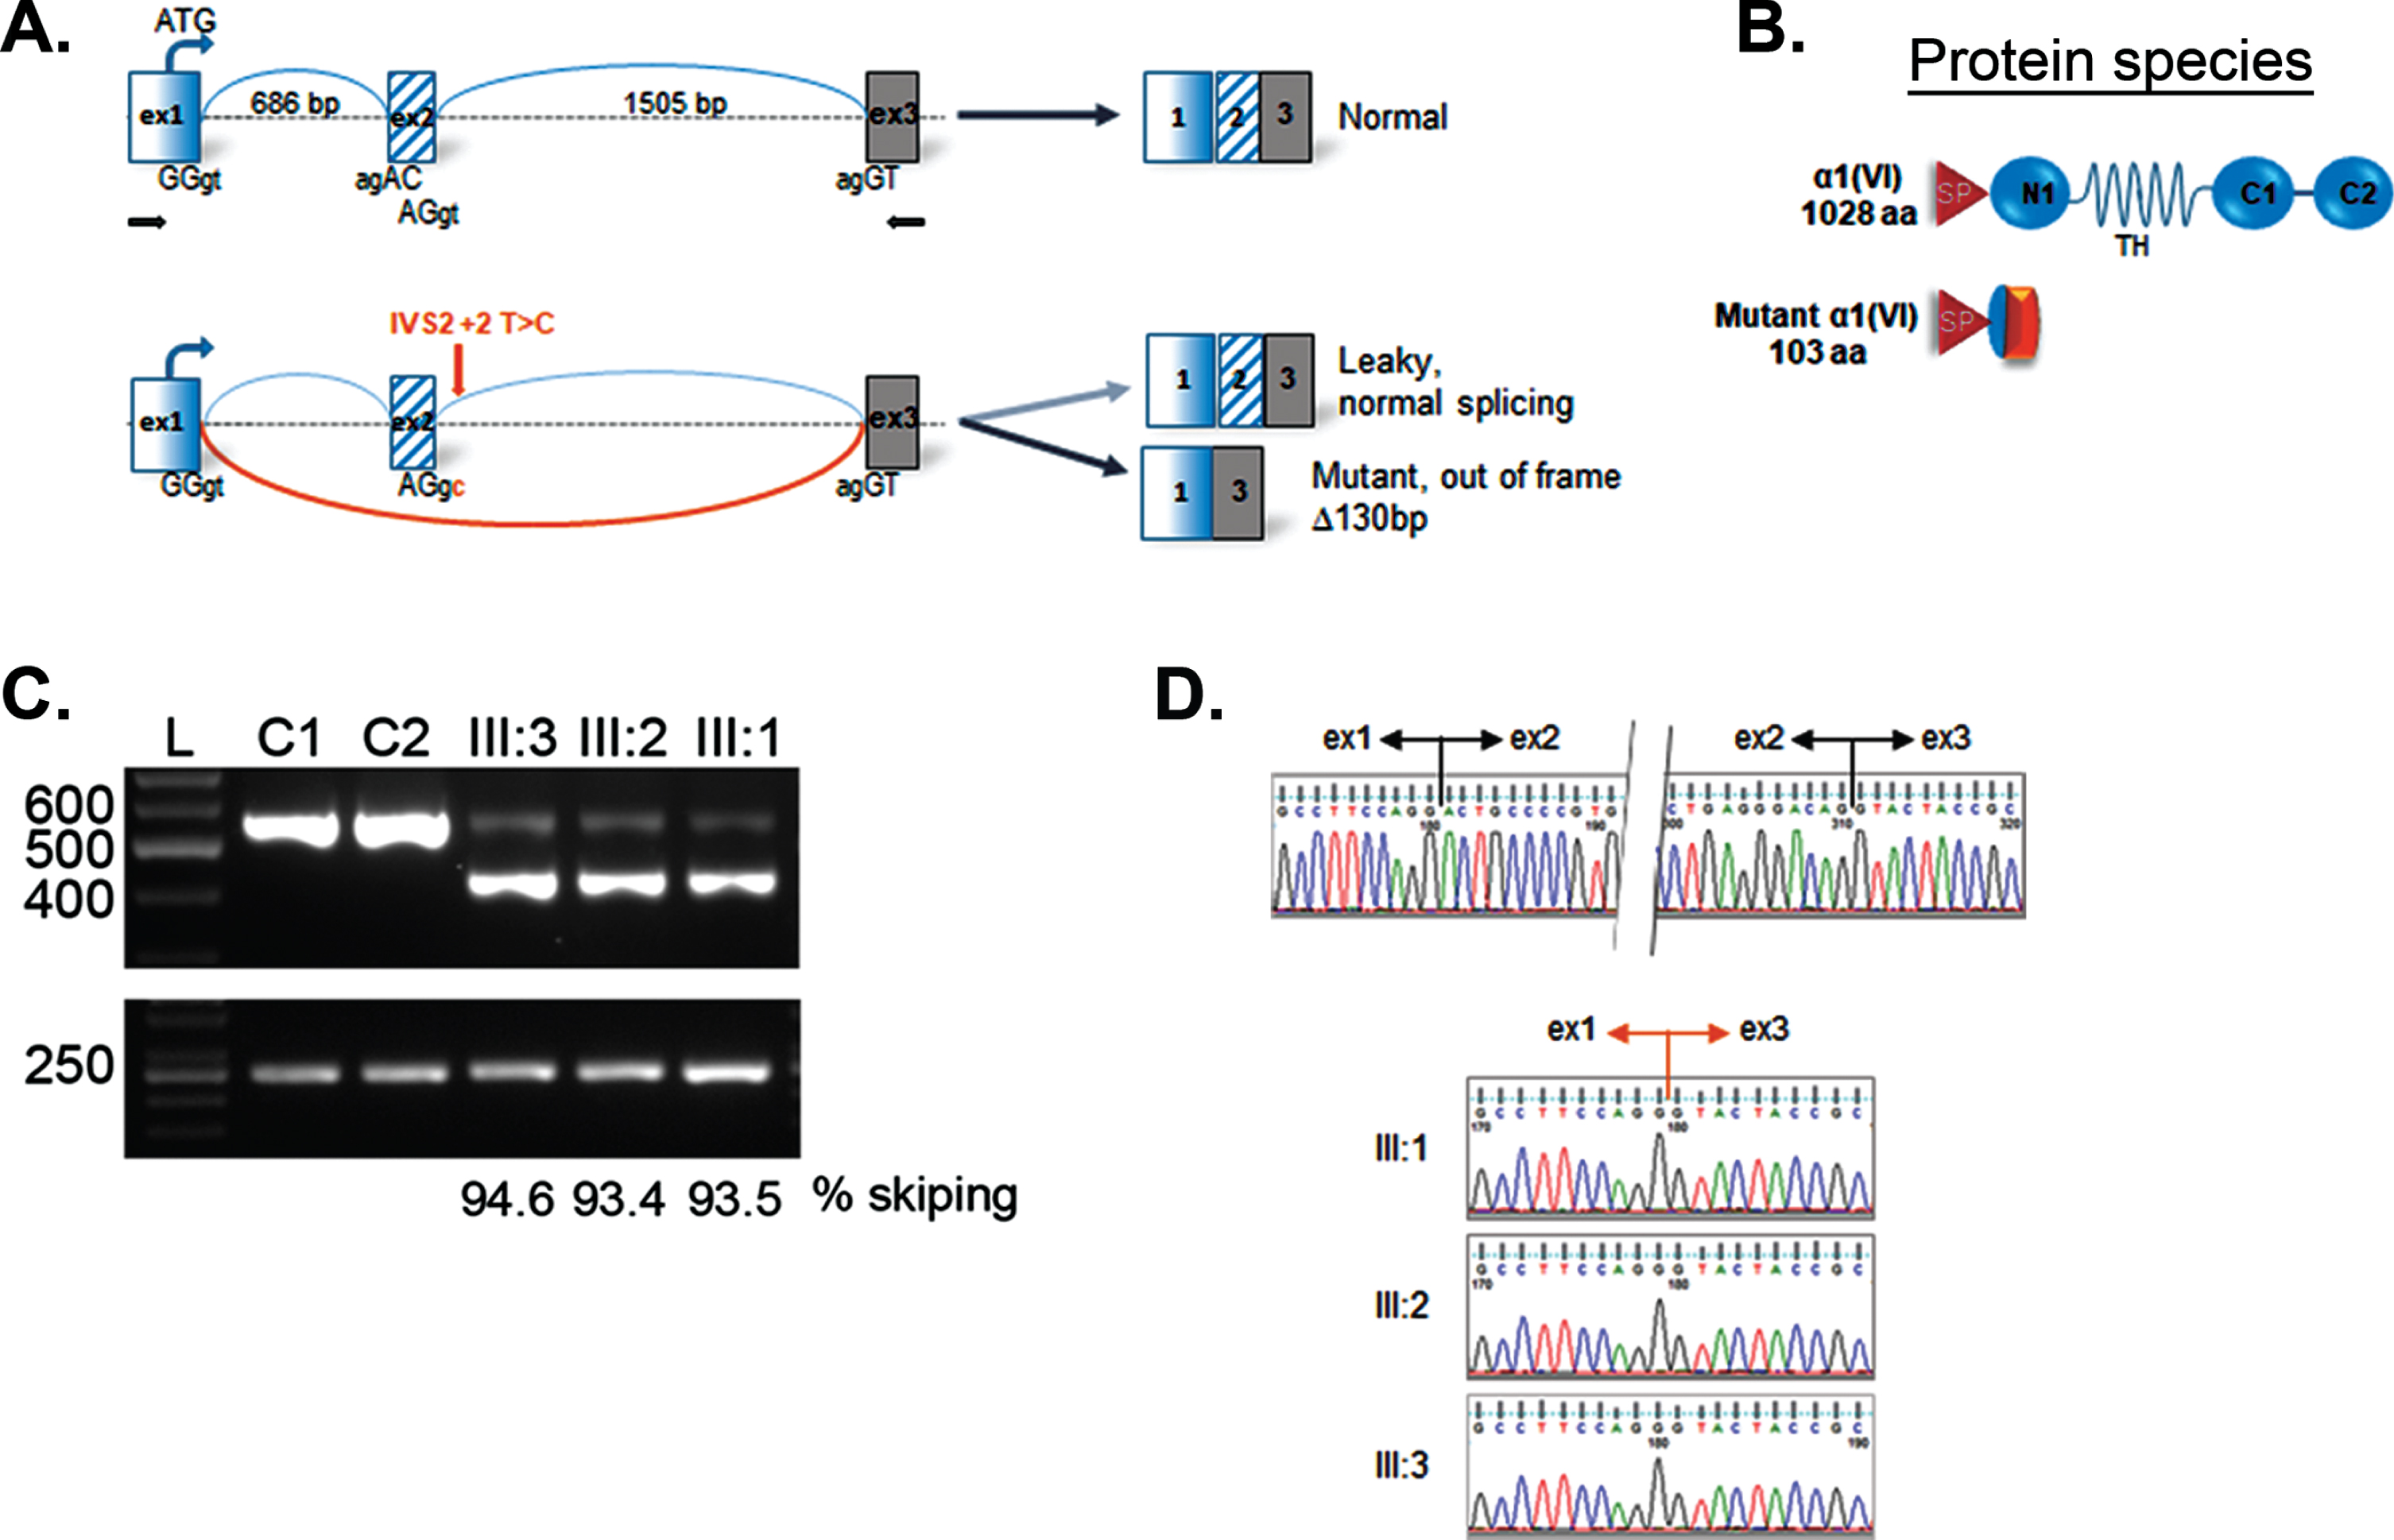 Skipping of exon 2 in COL6A1. Schematic representation of mutation effect on “leaky” splicing, which allows generating some normal transcripts and significant amount of mutant transcript with deletion of 2 exon having a size of 130 bp in patient (A); scheme of normal full-length (1028 aa) and mutant protein α1 (VI) 103 aa; SP –signal peptide; TH –triple helical domain; C1–C2 -terminal domains (B); RT-PCR gel showing an additional faster migrating band in the patient lanes (III:1; III:2; III:3), but not in the normal controls (C1, C2) (C); sequencing chromatogram of cDNA representing the upper normal band (top) and lower band in patient III:1, III:2, III:3 revealing the loss of sequence corresponding to exon 2. RPLP0 was used as reference gene (bottom) (D). Sequencing profiles showing the boundaries of exons 1/2 and 2/3 in a control individual upper panel), while the deletion of exon 2 is evidenced in the 3 patients (lower panels).